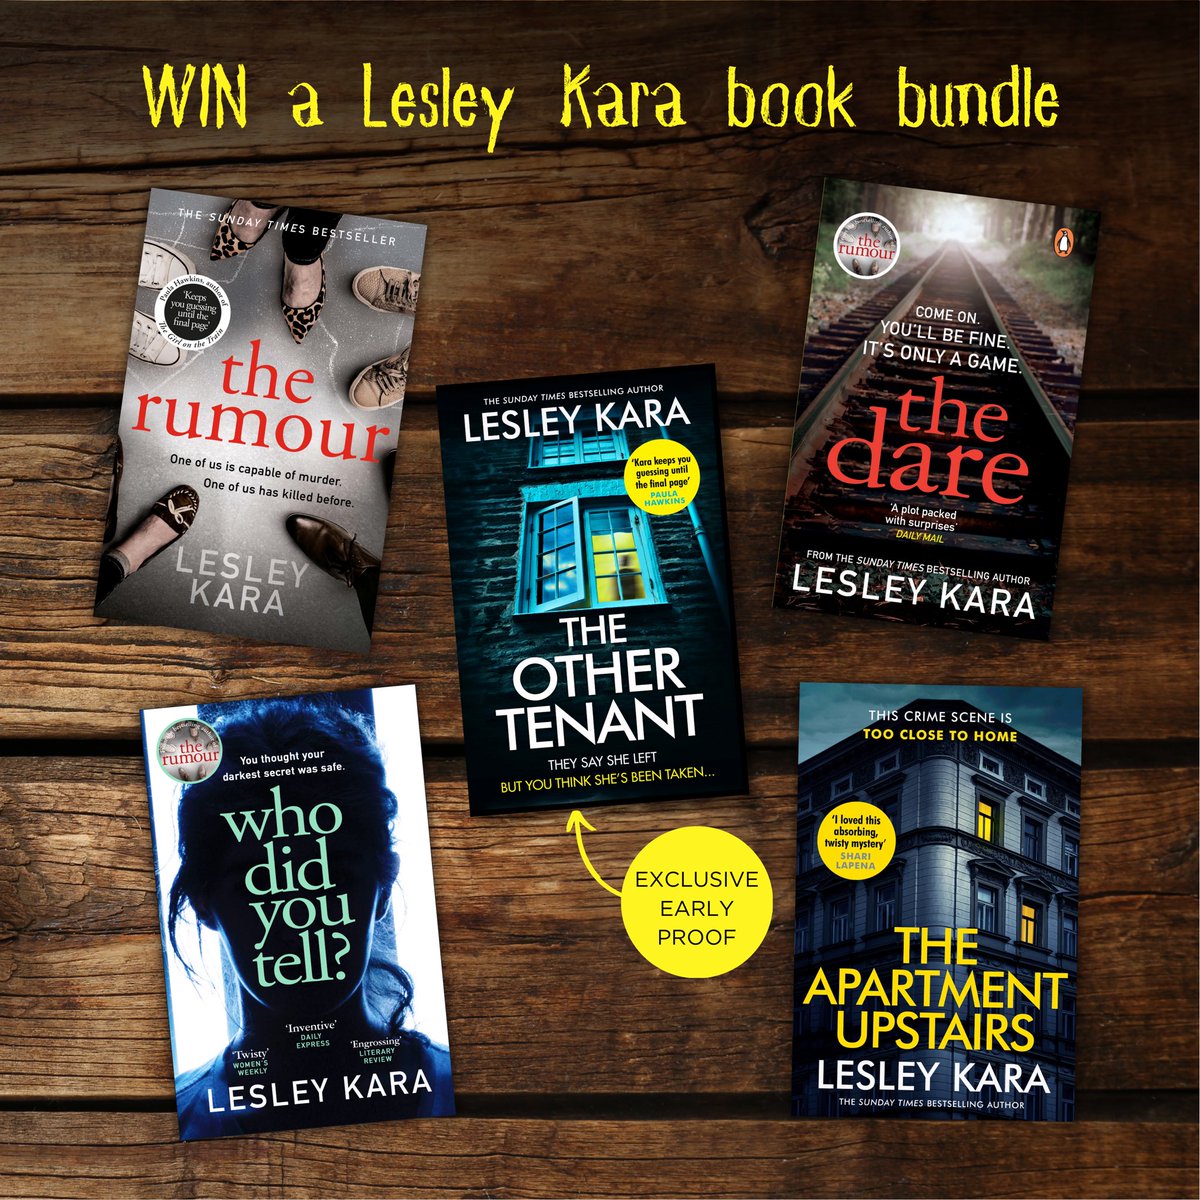 ⭐️ WIN an exclusive proof of my upcoming book, THE OTHER TENANT, plus my entire paperback backlist! ⭐️ ✨📕📗📒📙📘✨   To enter this #giveaway, all you need to do is subscribe to my newsletter here: linktr.ee/theothertenant (Existing subscribers will be automatically entered